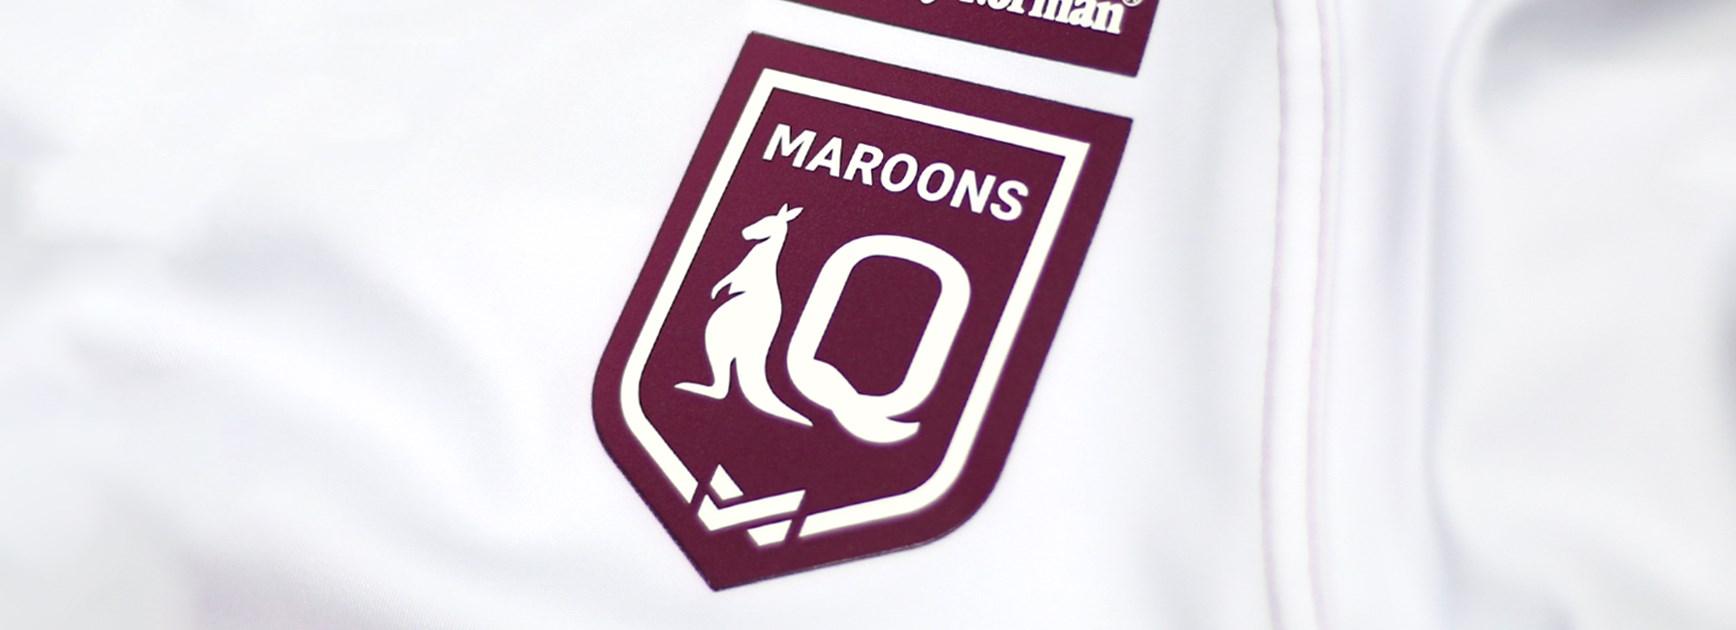 New logo for the Harvey Norman Queensland Maroons